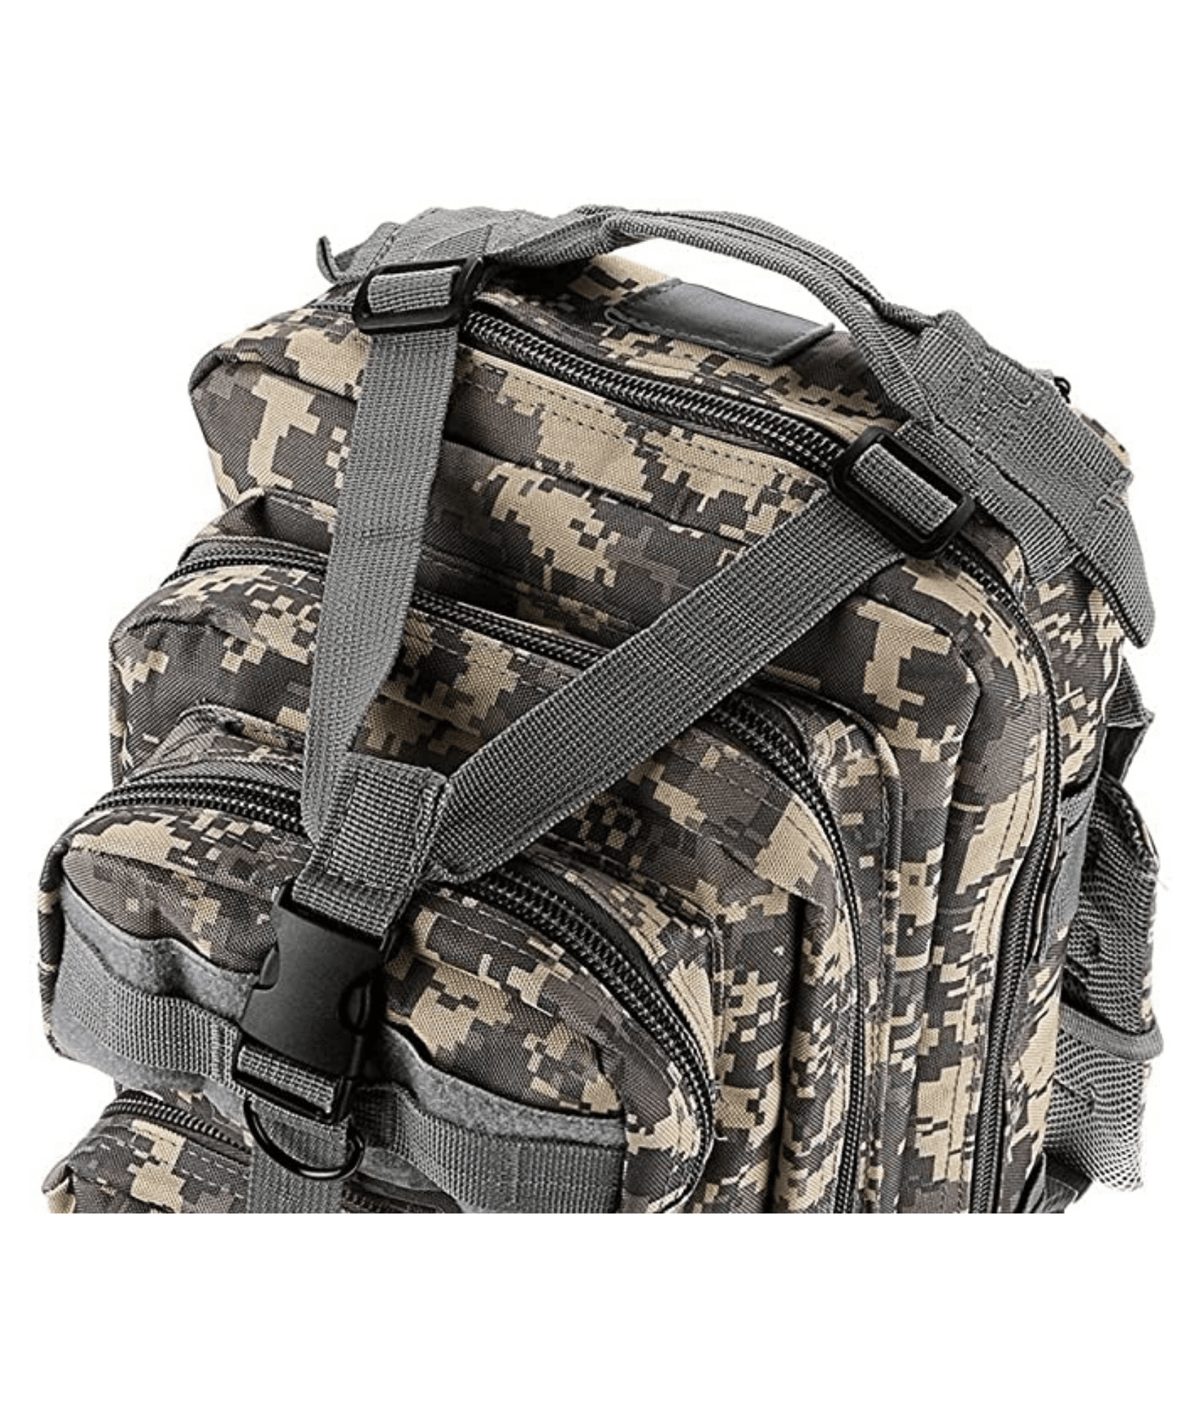 Jupiter Gear ACU Camouflage Tactical Military 25L Molle Backpack